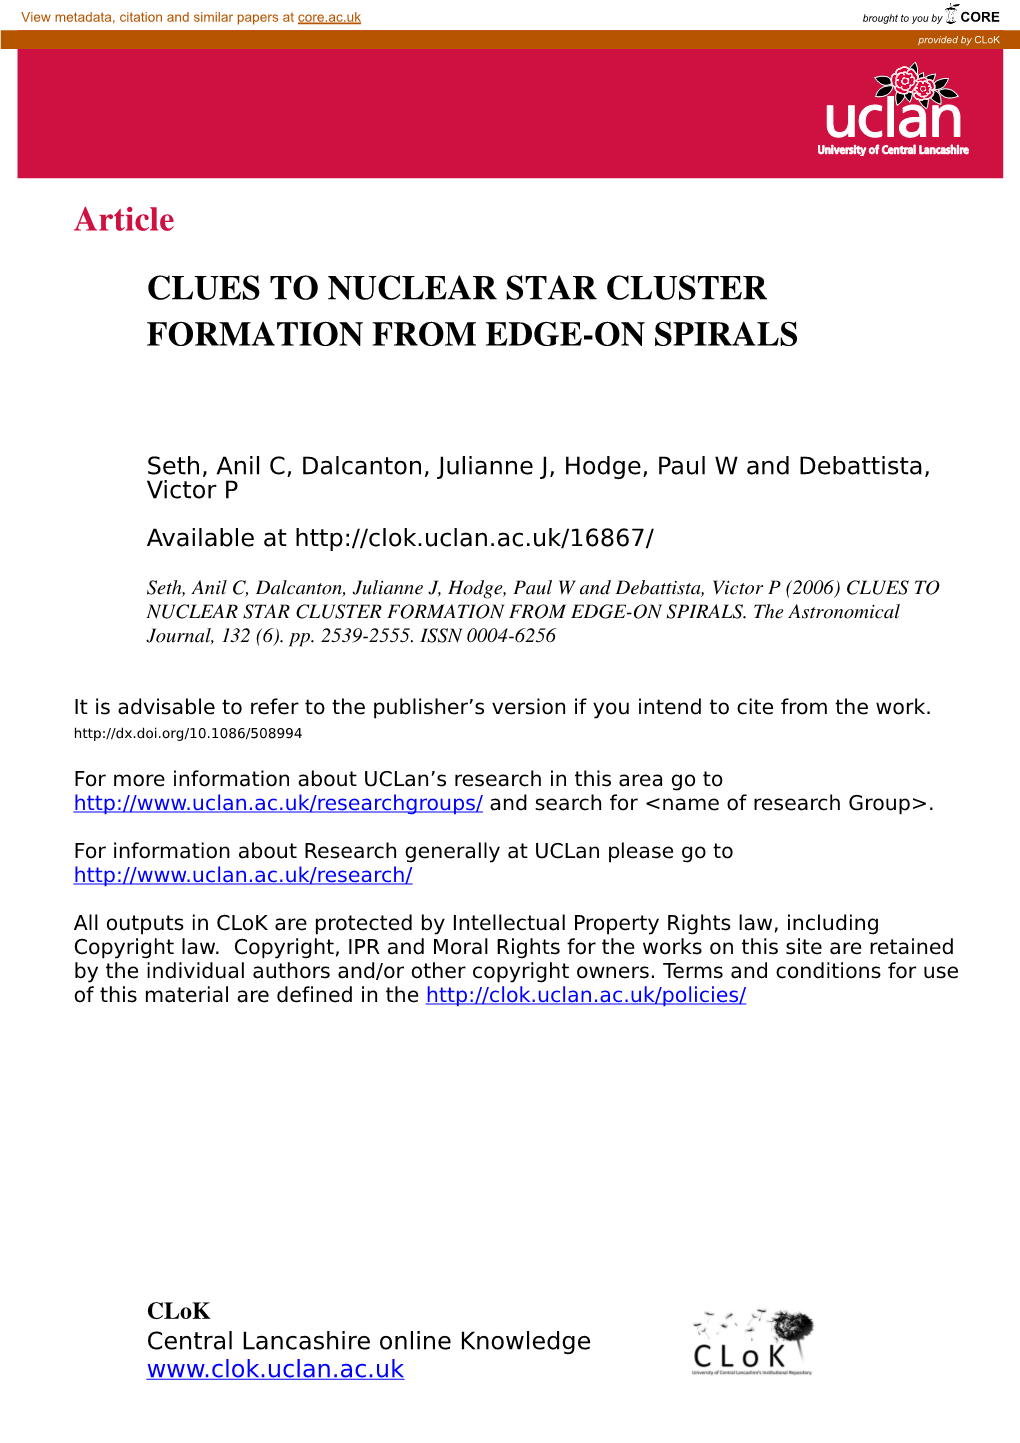 Article CLUES to NUCLEAR STAR CLUSTER FORMATION FROM